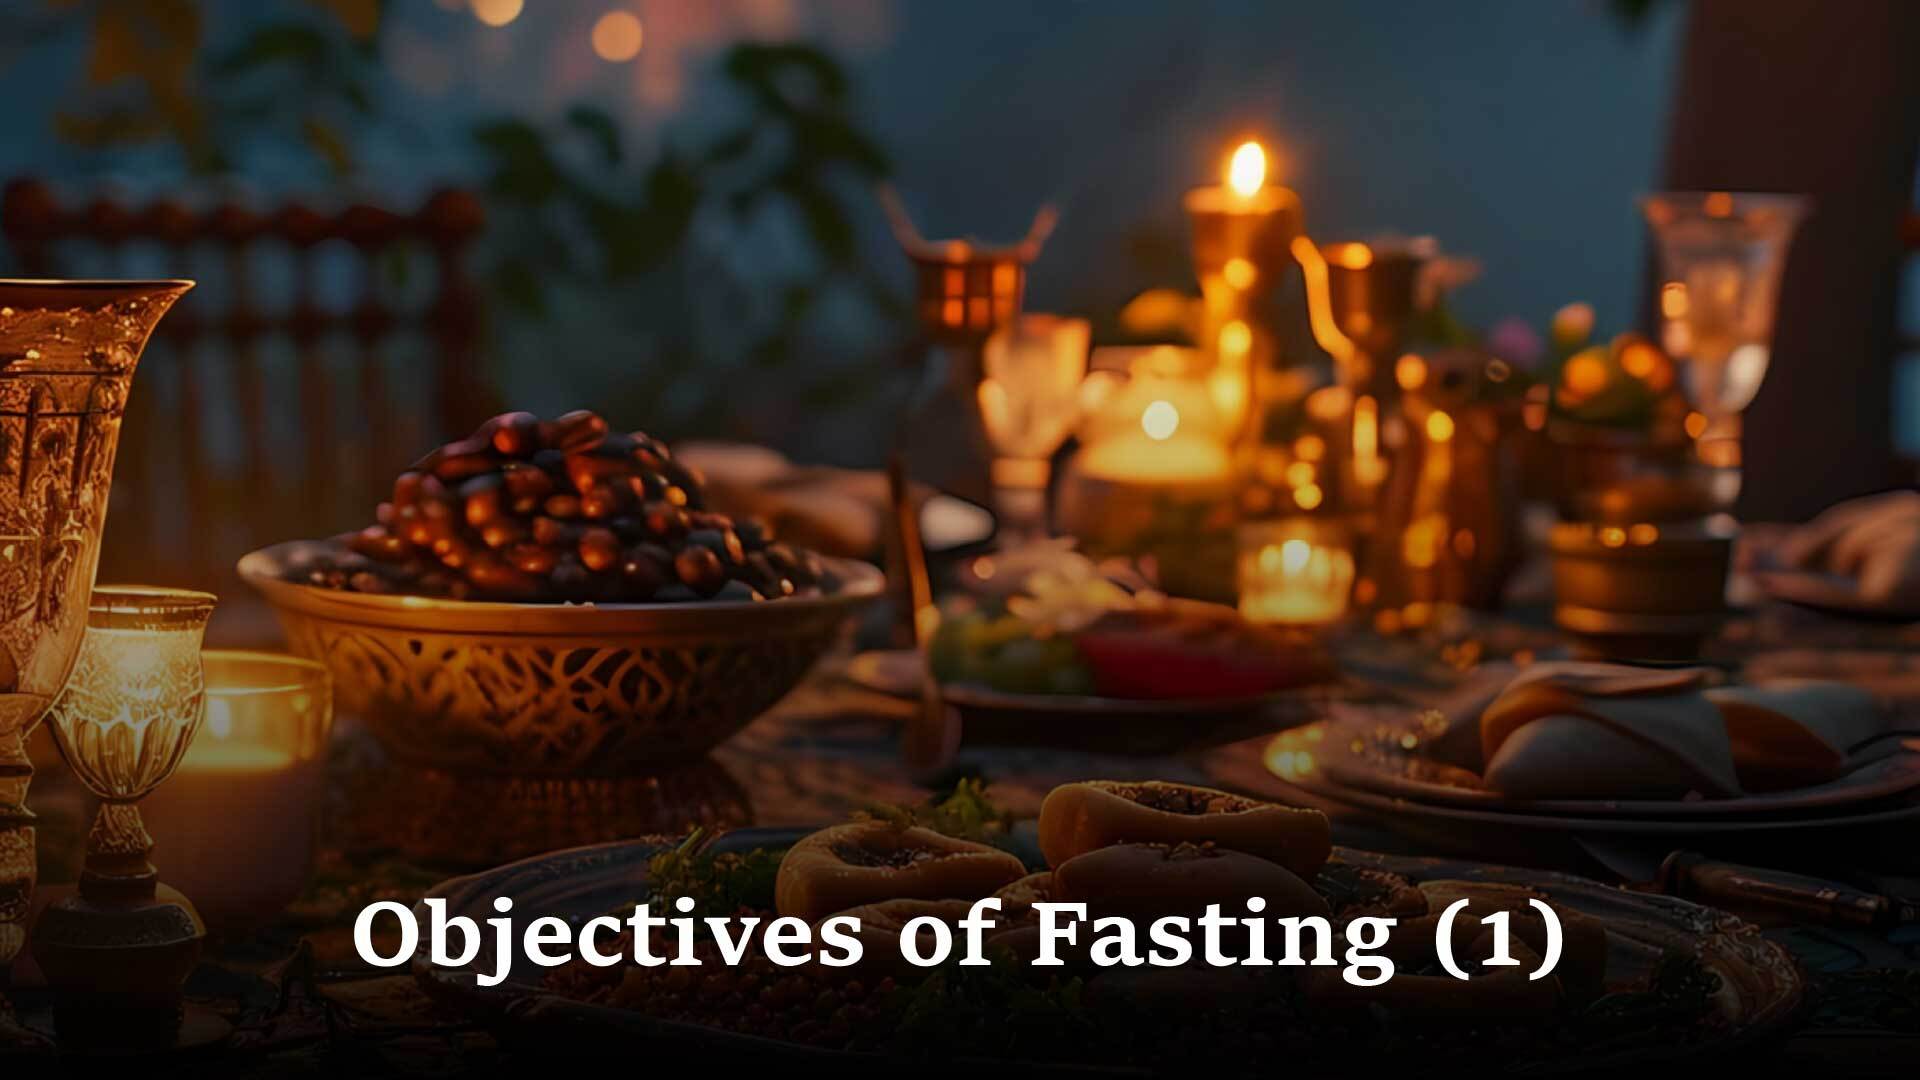 MAJOR OBJECTIVE OF FASTING